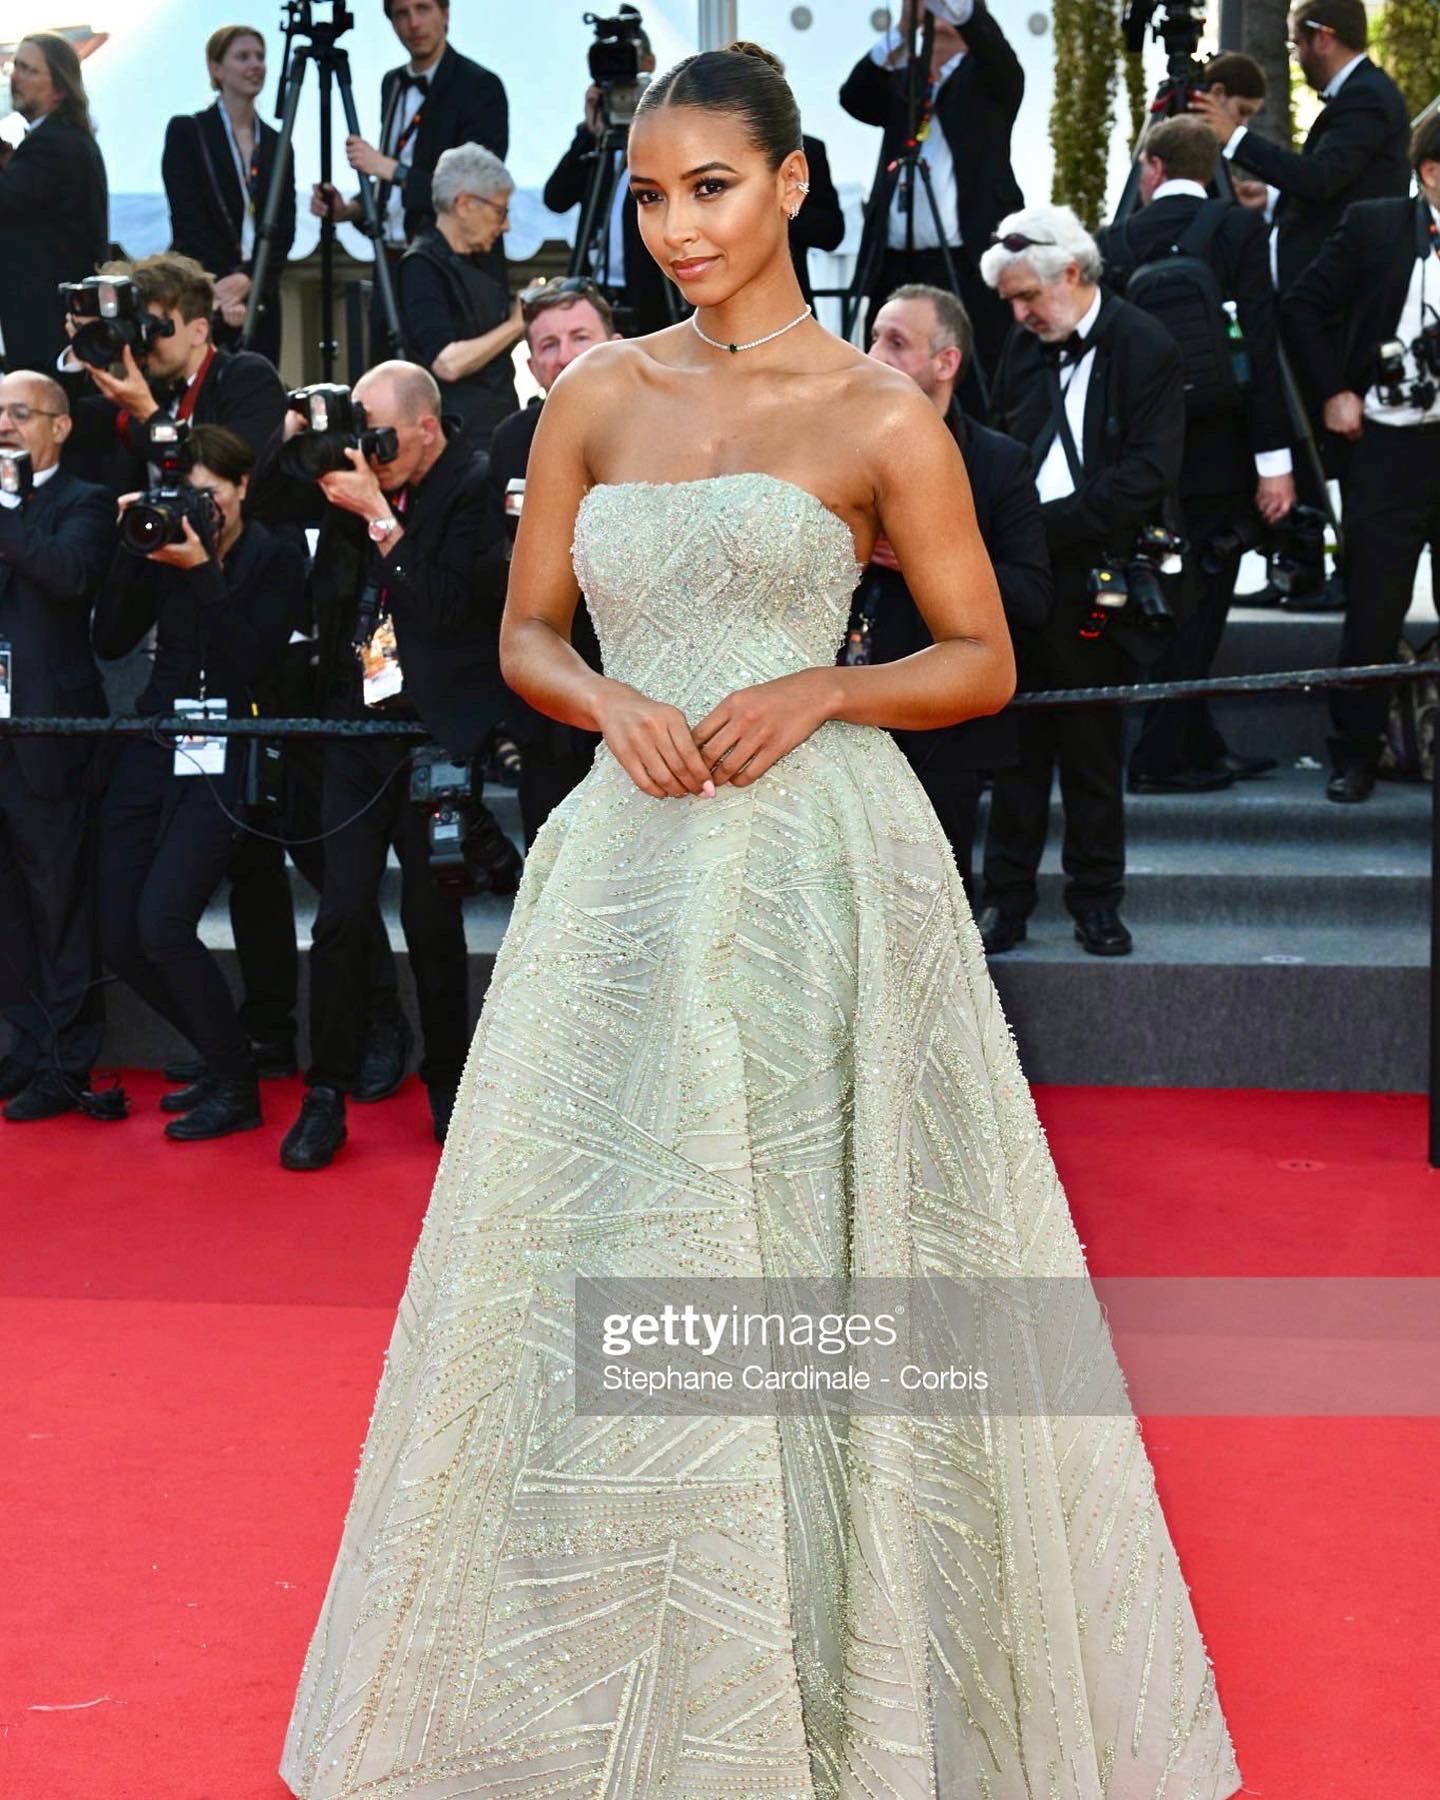 Image for Middle Eastern Fashion Couturier Sara Onsi Dominated This Year’s Cannes Film Festival Red Carpet Looks